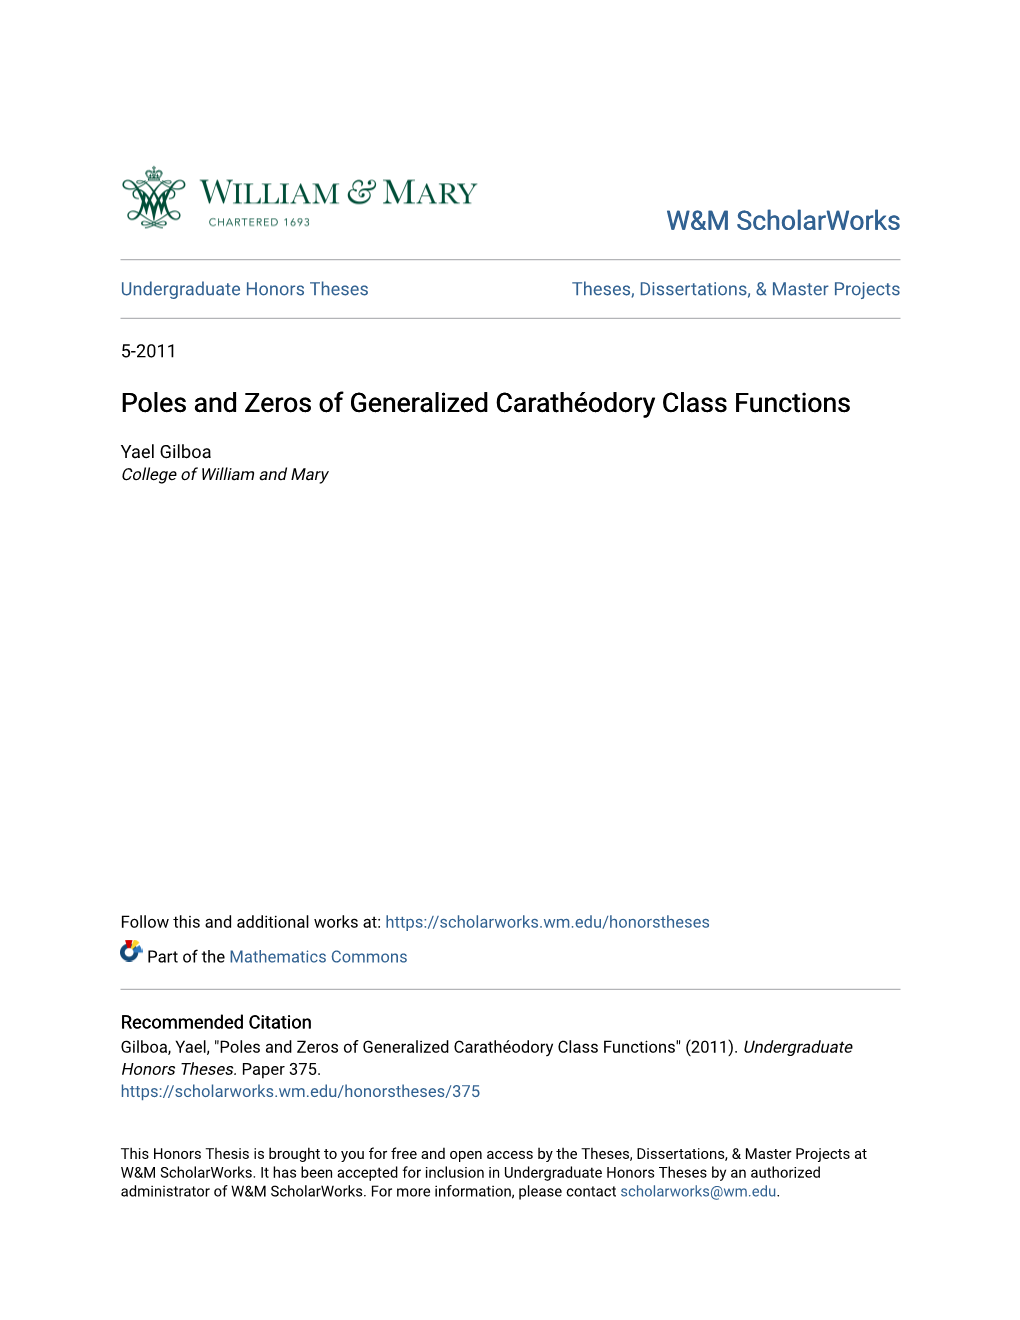 Poles and Zeros of Generalized Carathéodory Class Functions